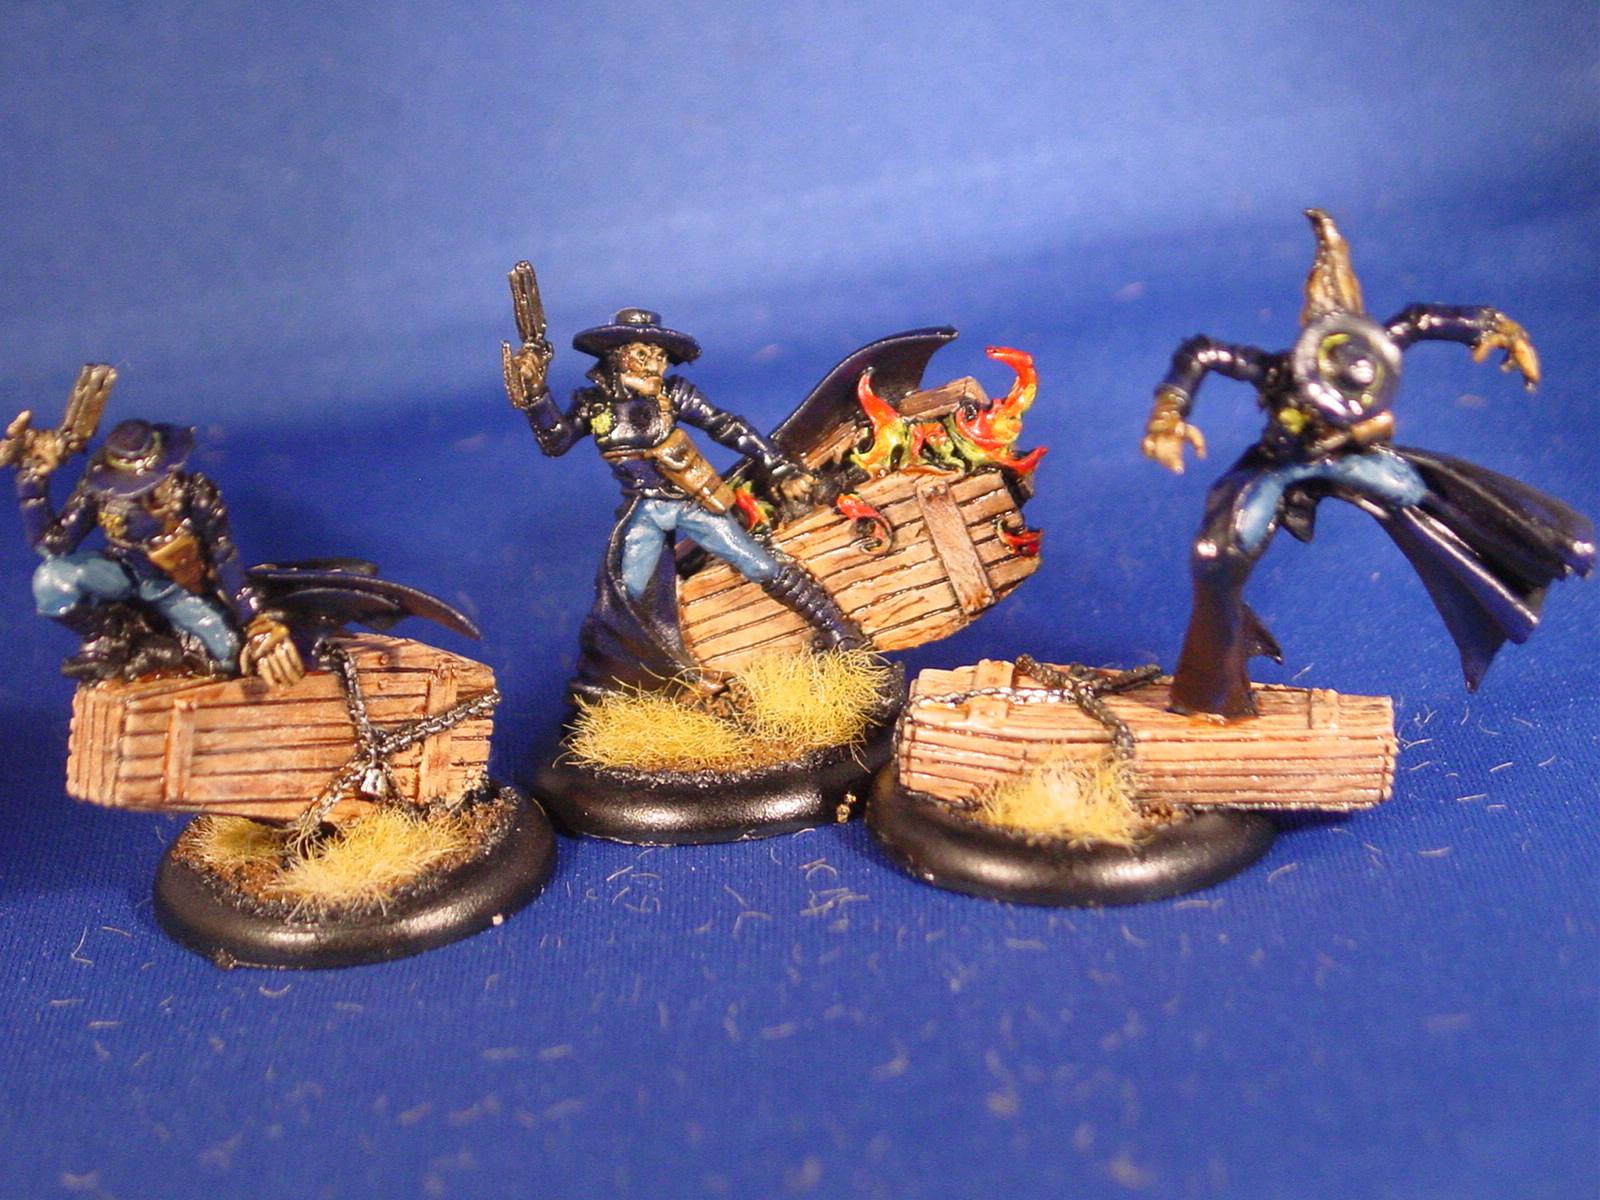 Horrors, Malifaux, Malifaux, The Guild, Death Marshals